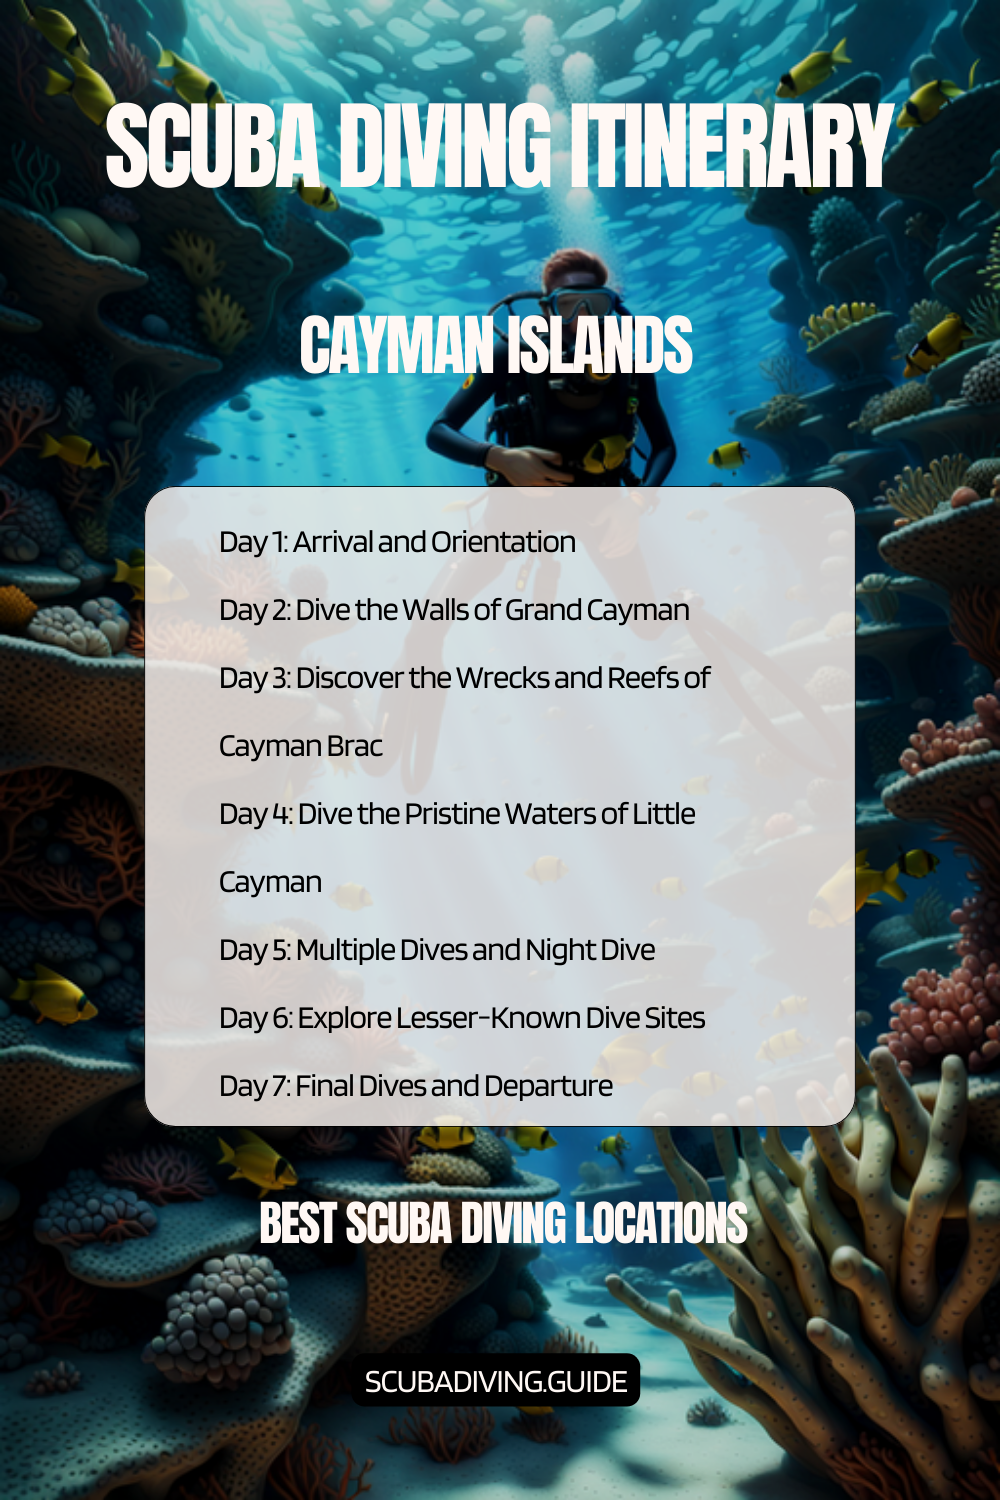 Cayman Islands Recommended Scuba Diving Itinerary